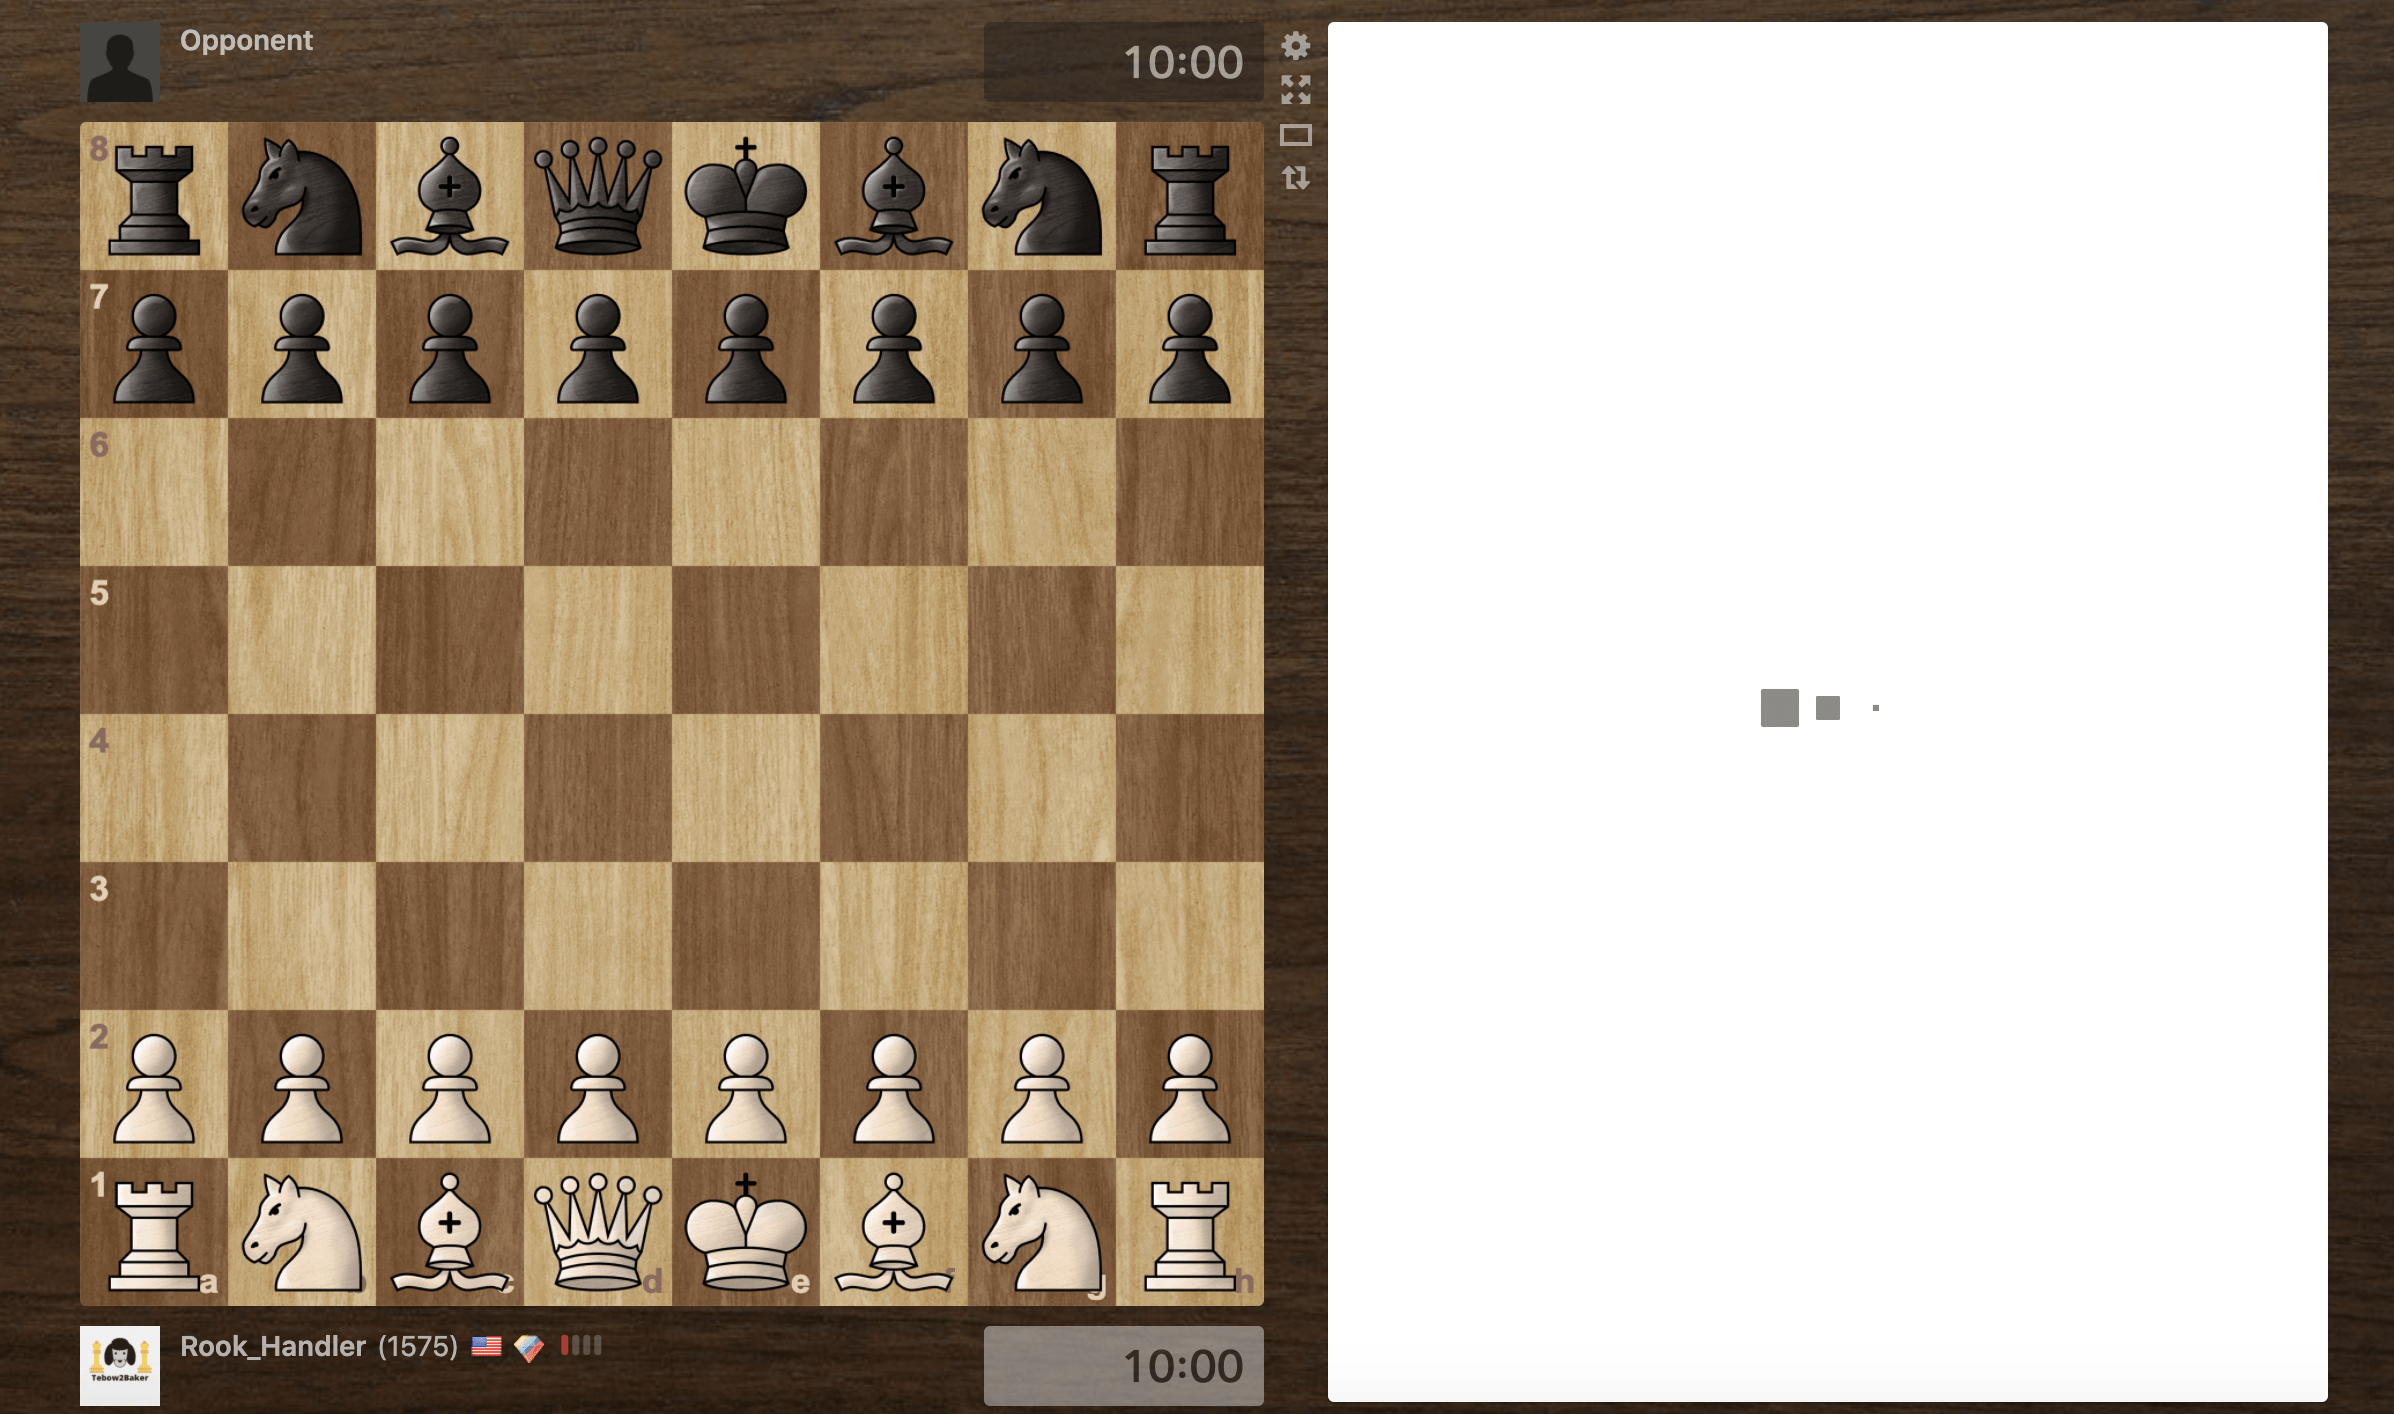 What happened to the Openings section at the mobile app? - Chess Forums 